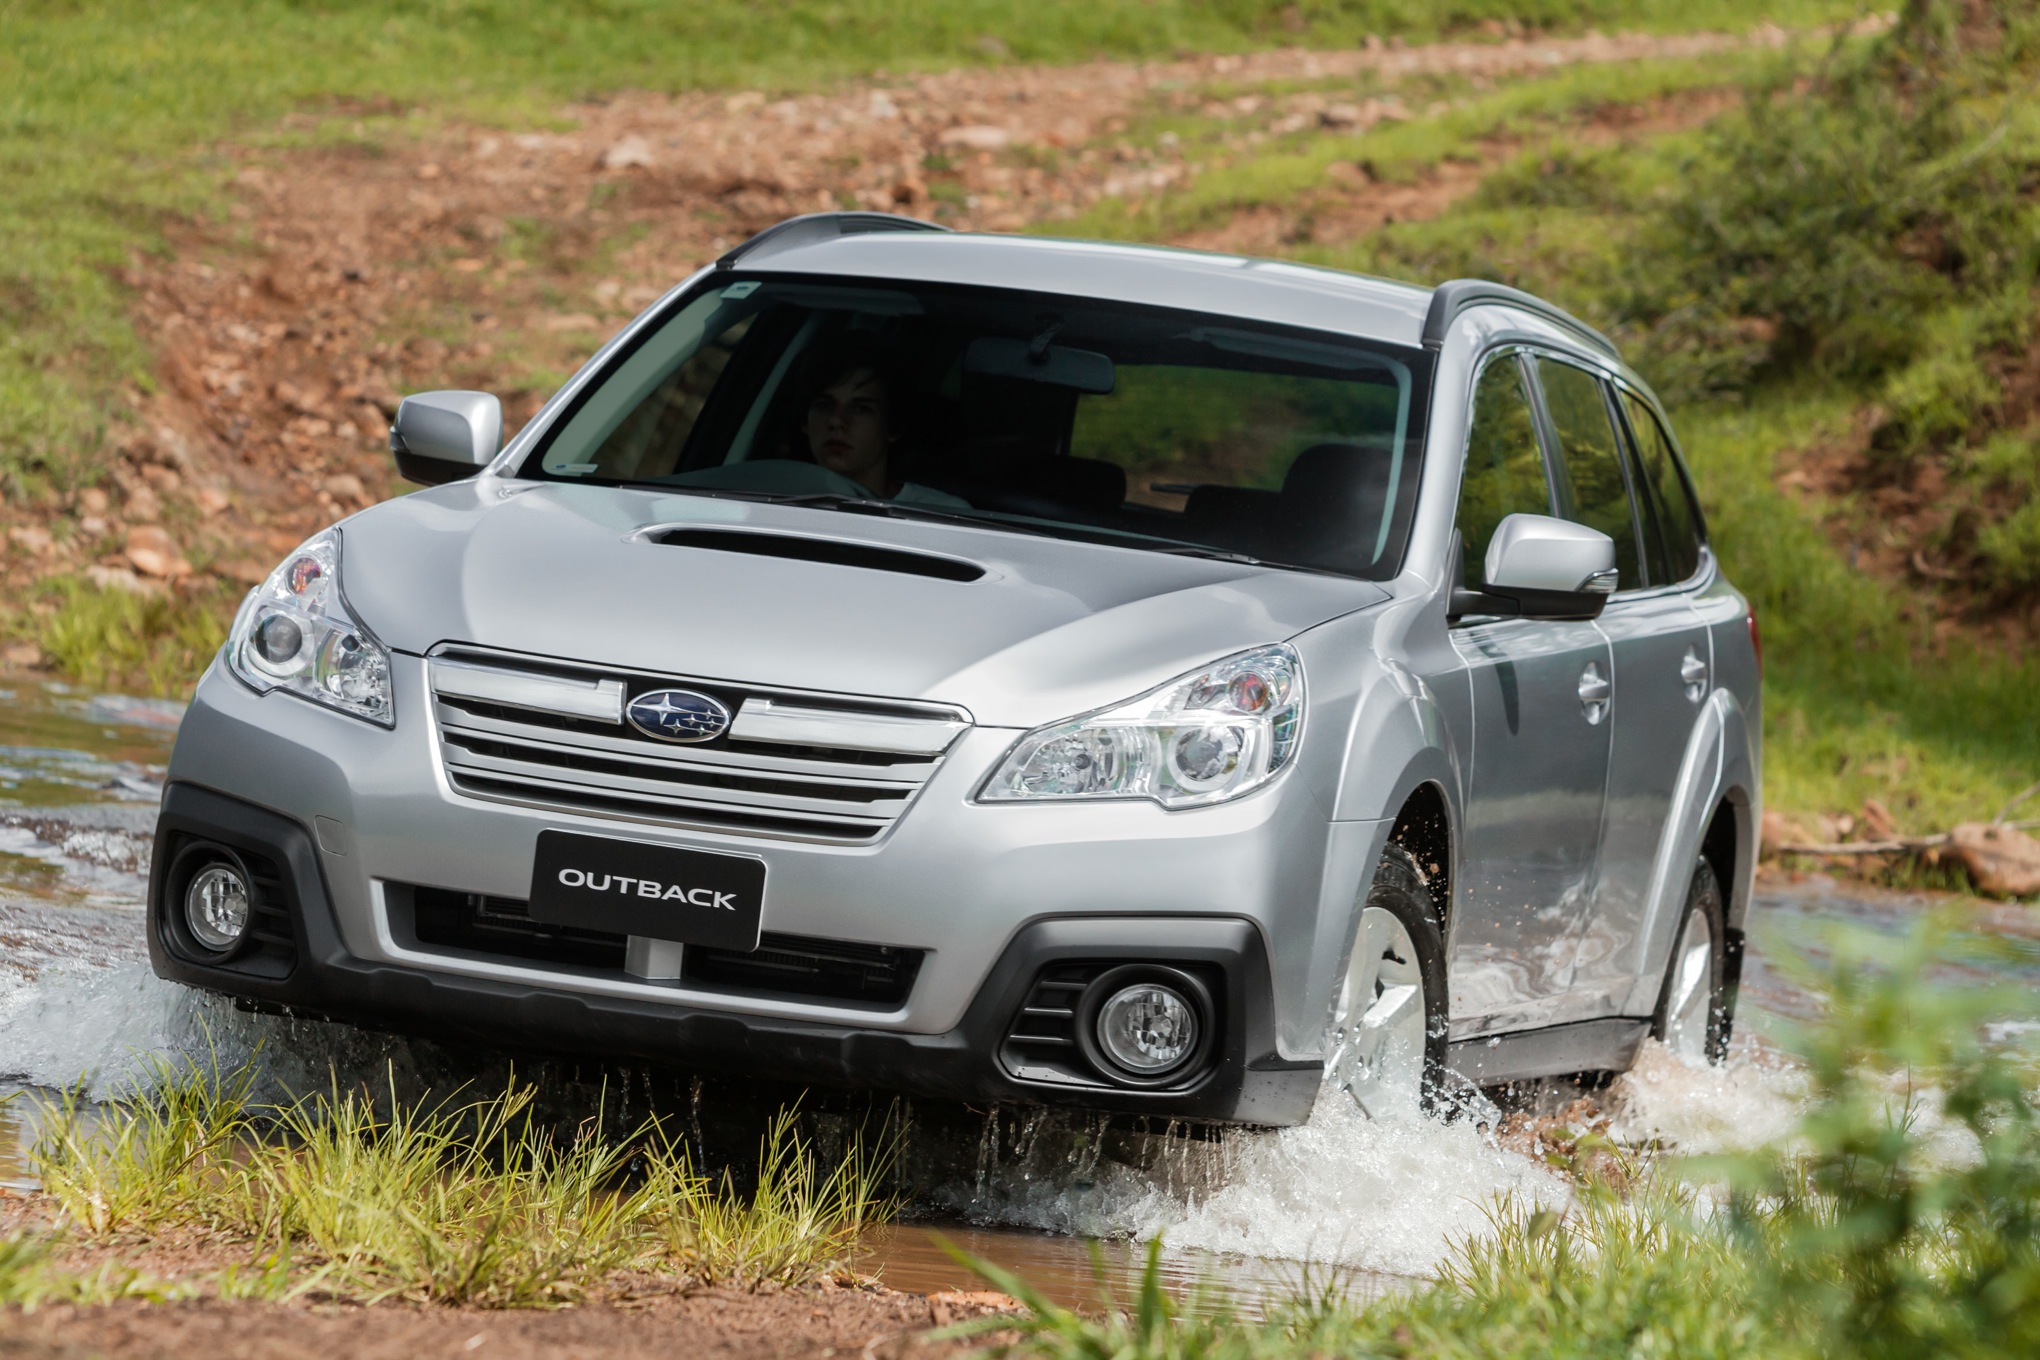 Subaru Outback Diesel Automatic Review photos CarAdvice